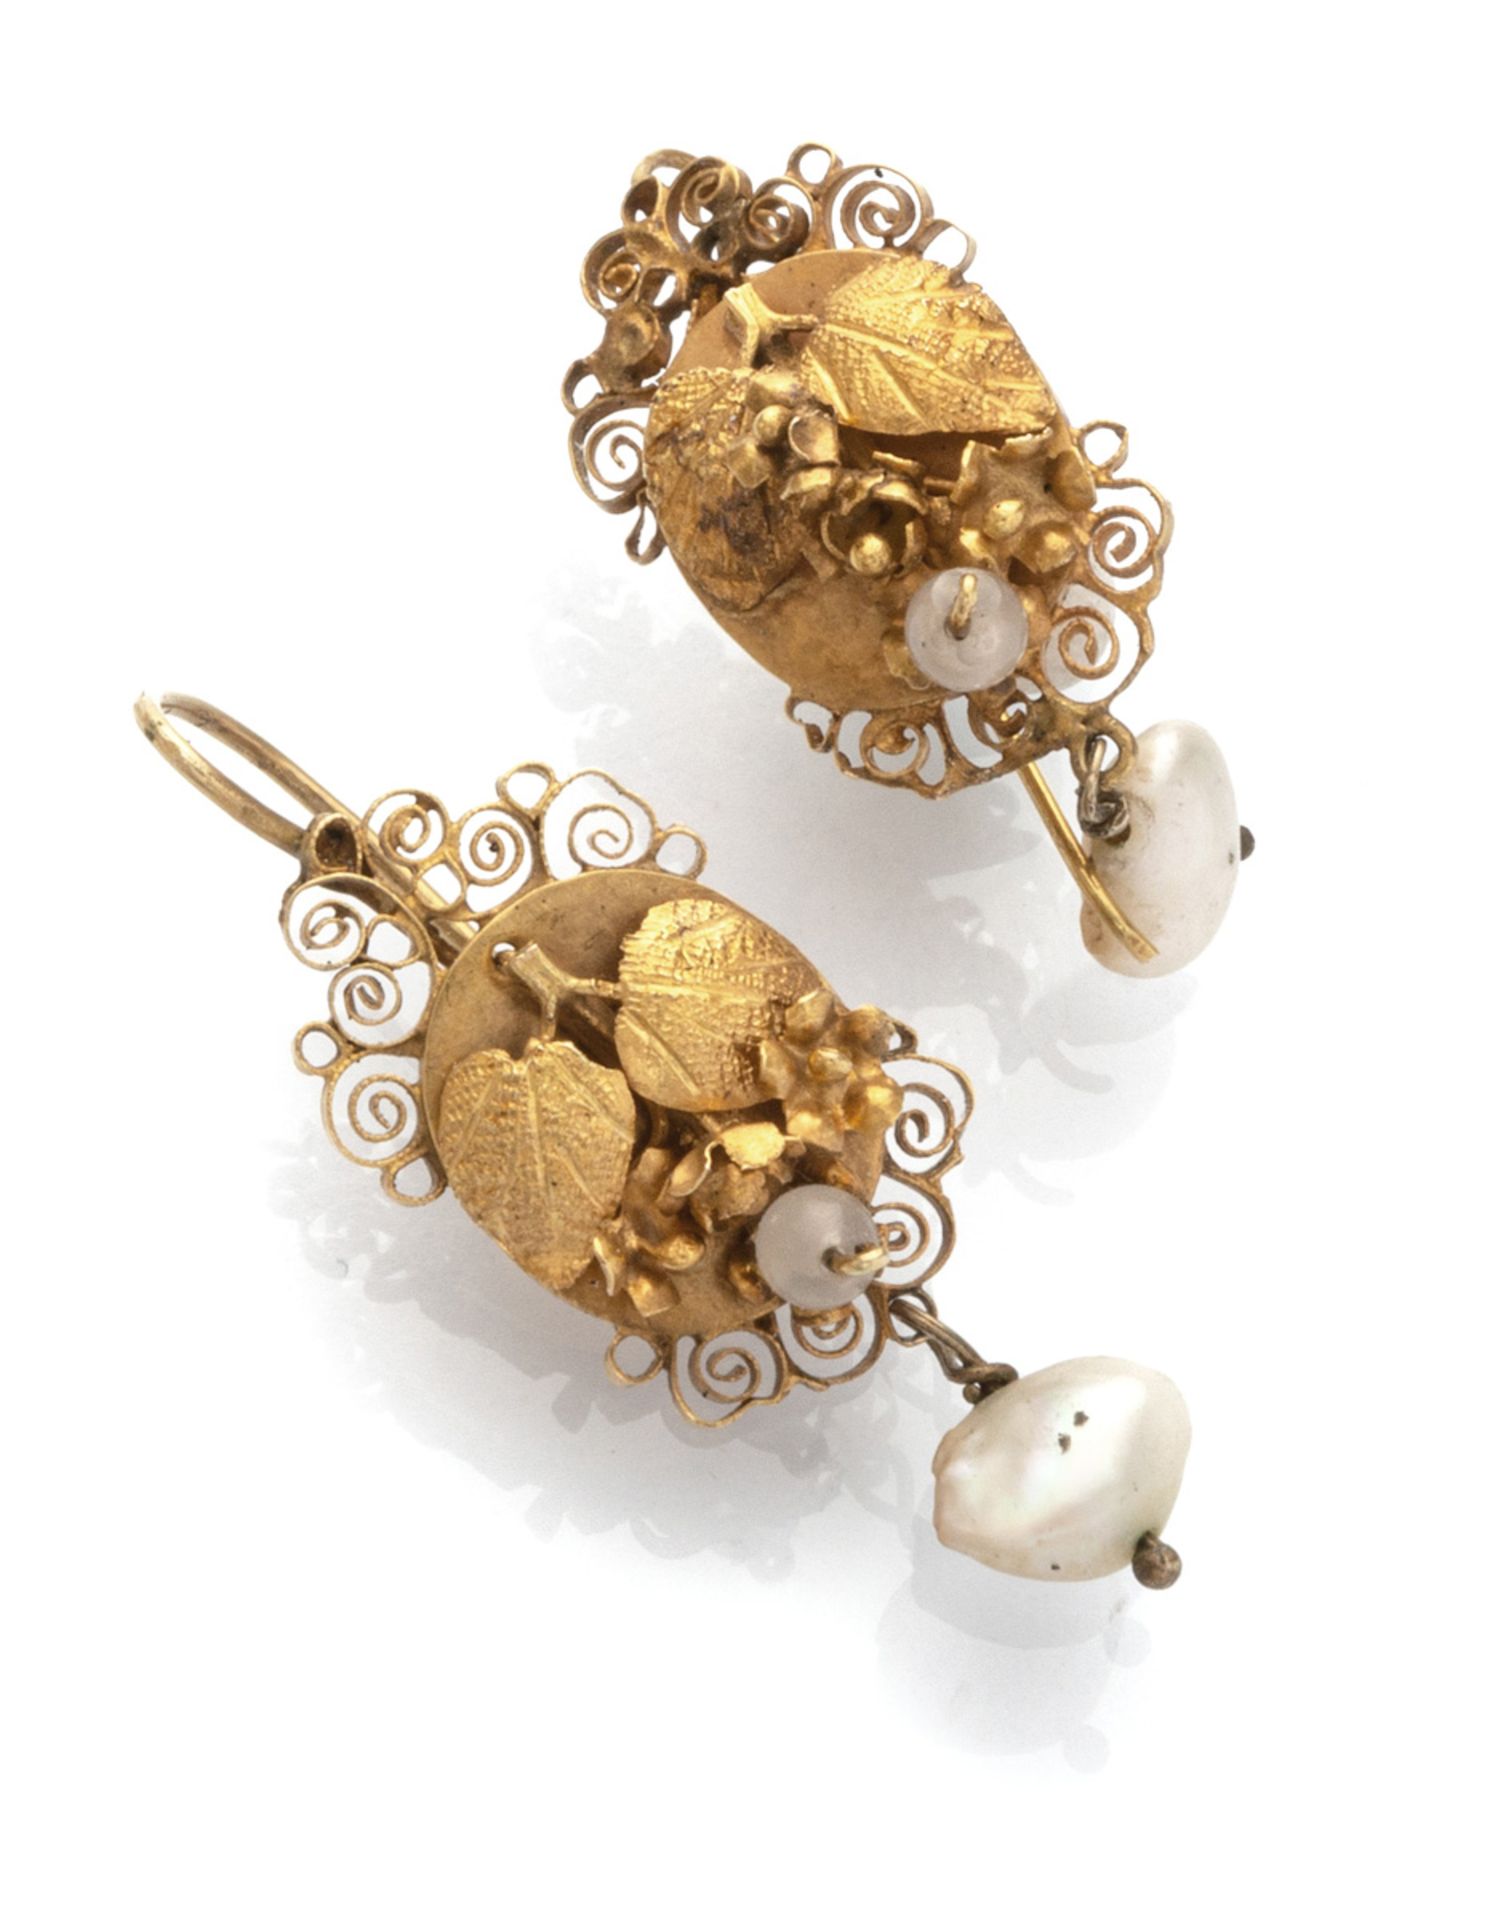 EARRINGS in yellow gold 18 kts., with filigree and central decoration of bloomed raceme with pending